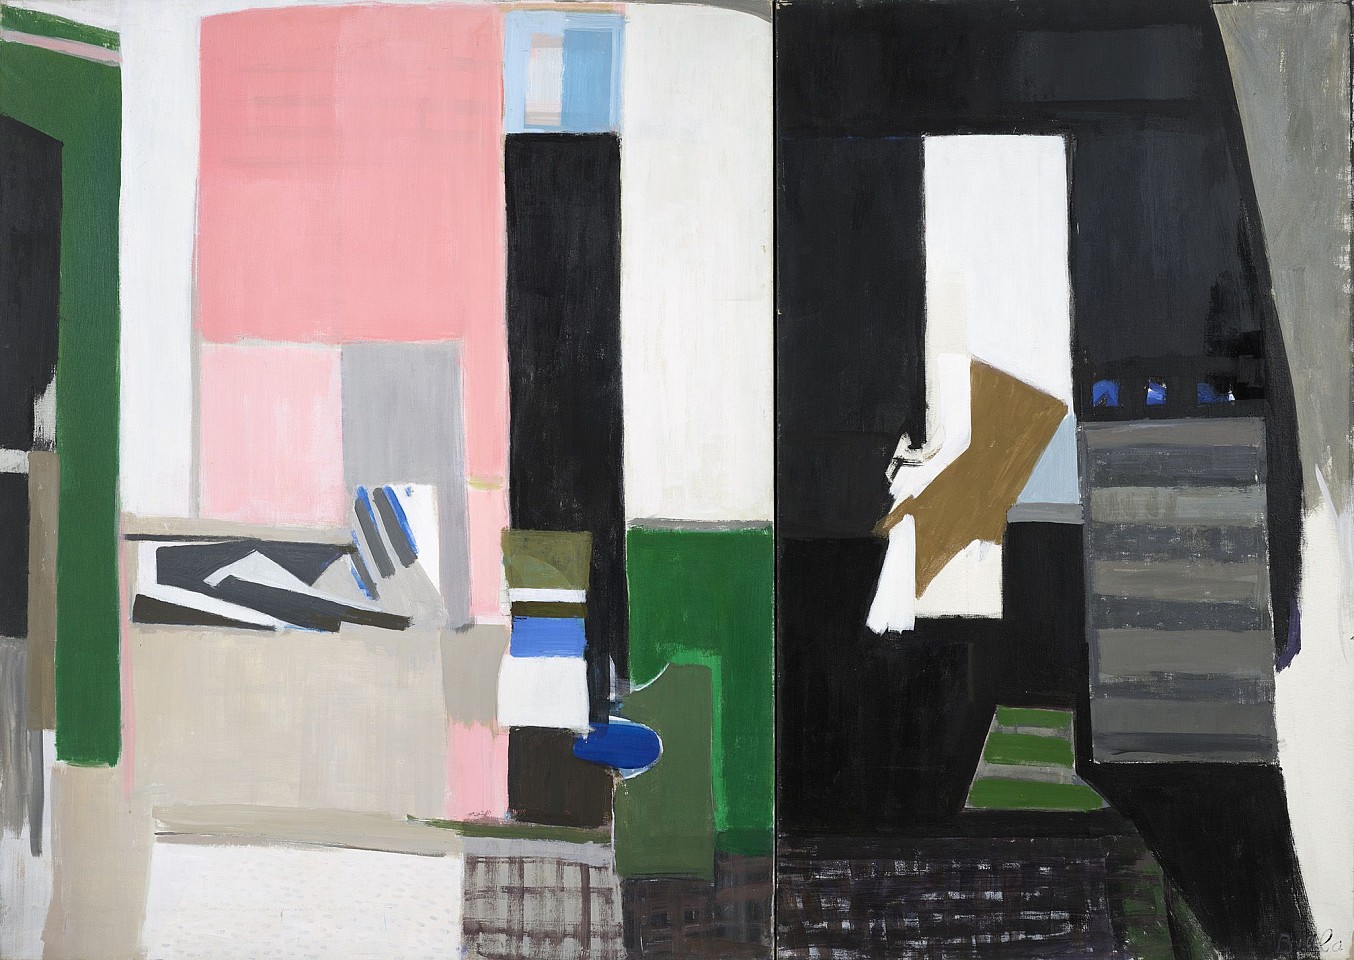 Janice Biala, Intérieur à grands plans noirs, blancs, rose (Interior with large black, white, pink planes), 1972
Oil on canvas, 63 5/8 x 89 1/4 in. (161.6 x 226.7 cm)
BIAL-00018